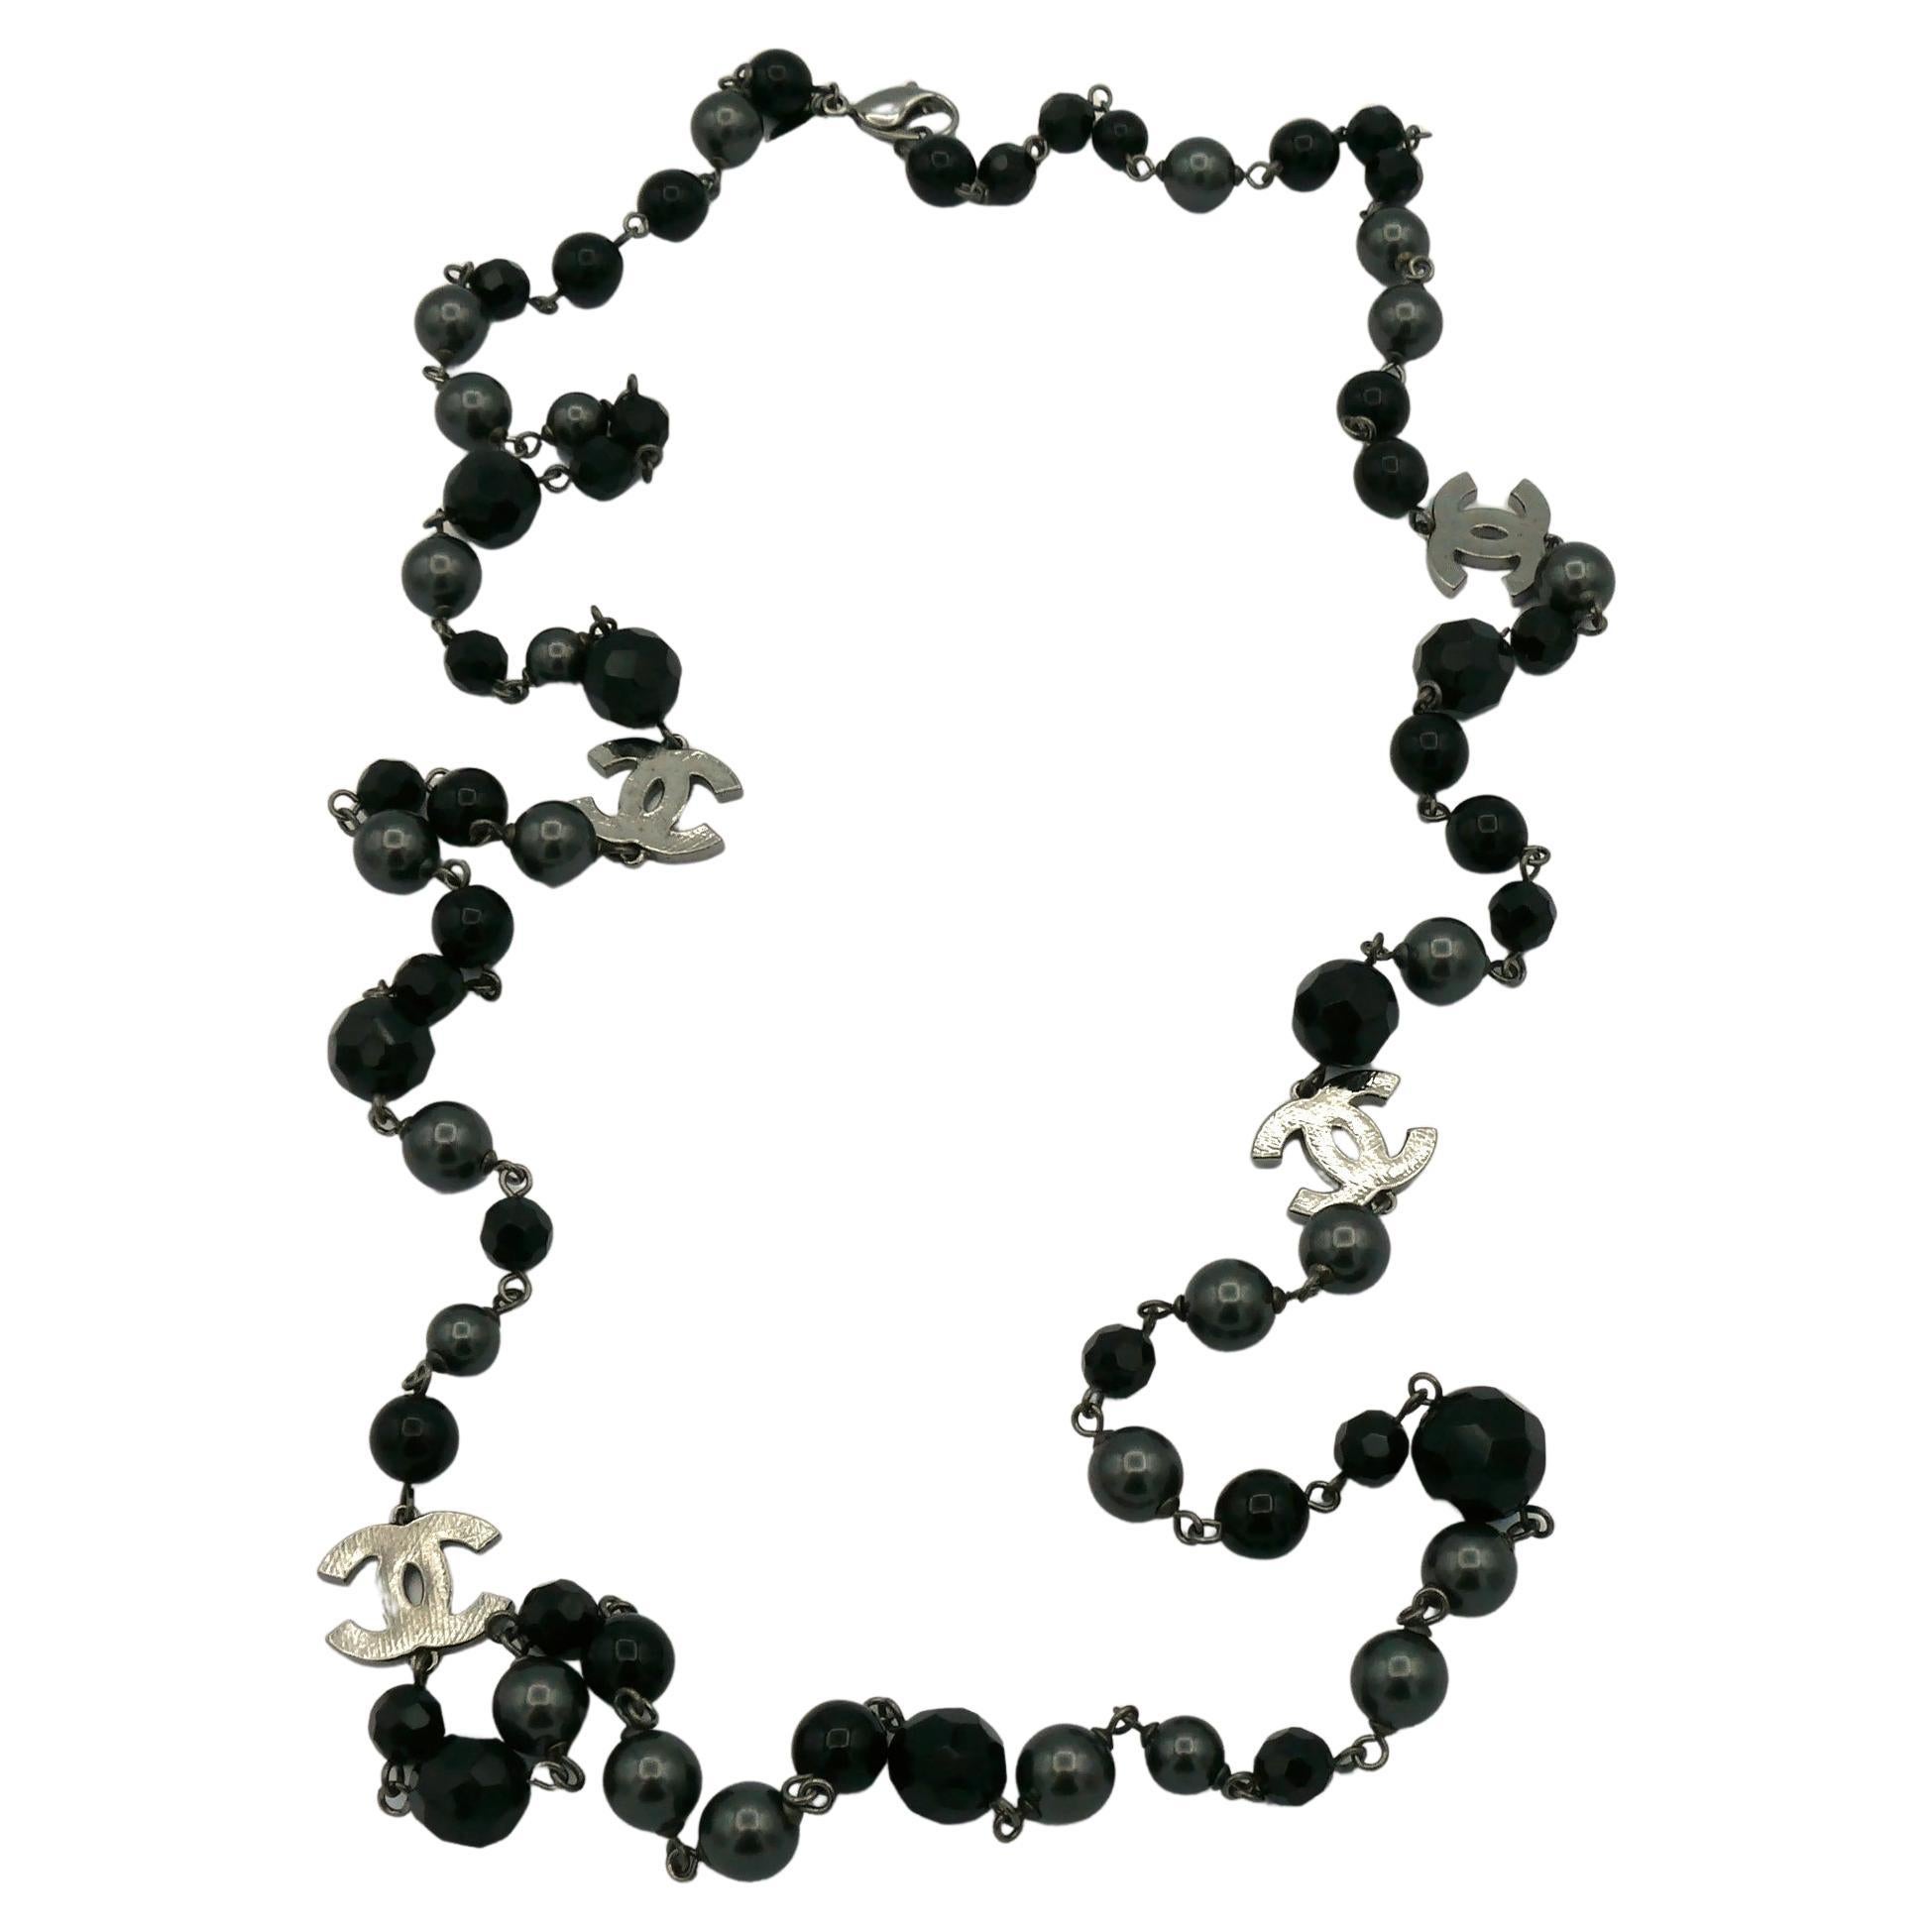 CHANEL by KARL LAGERFELD 2010 Grey Pearl and Black Bead CC Necklace For Sale